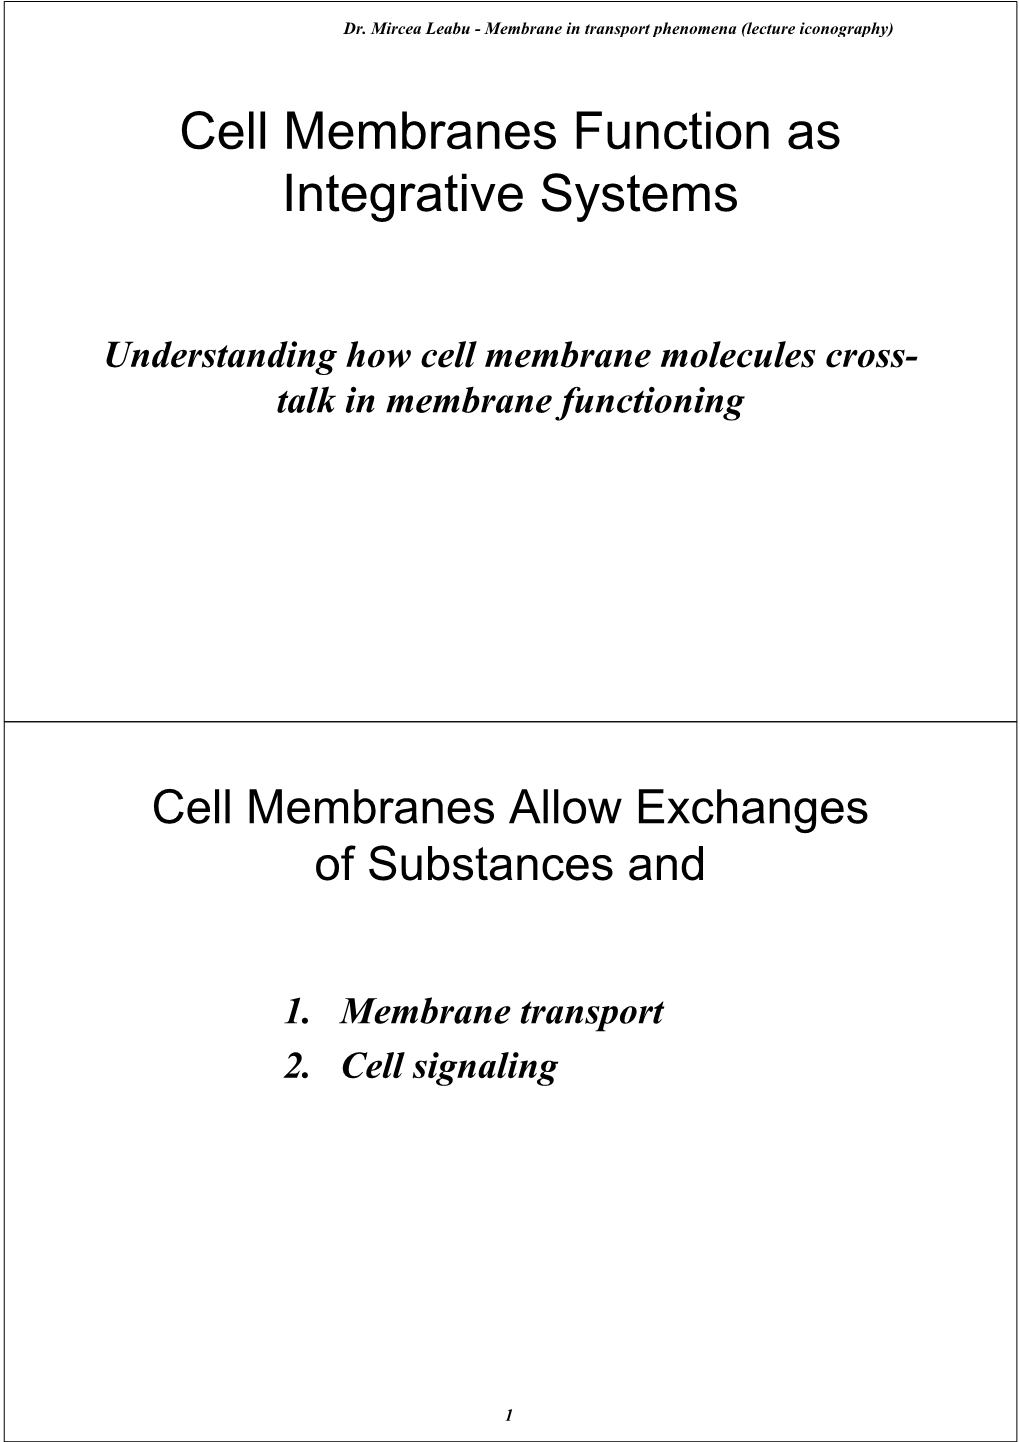 Cell Membranes Function As Integrative Systems